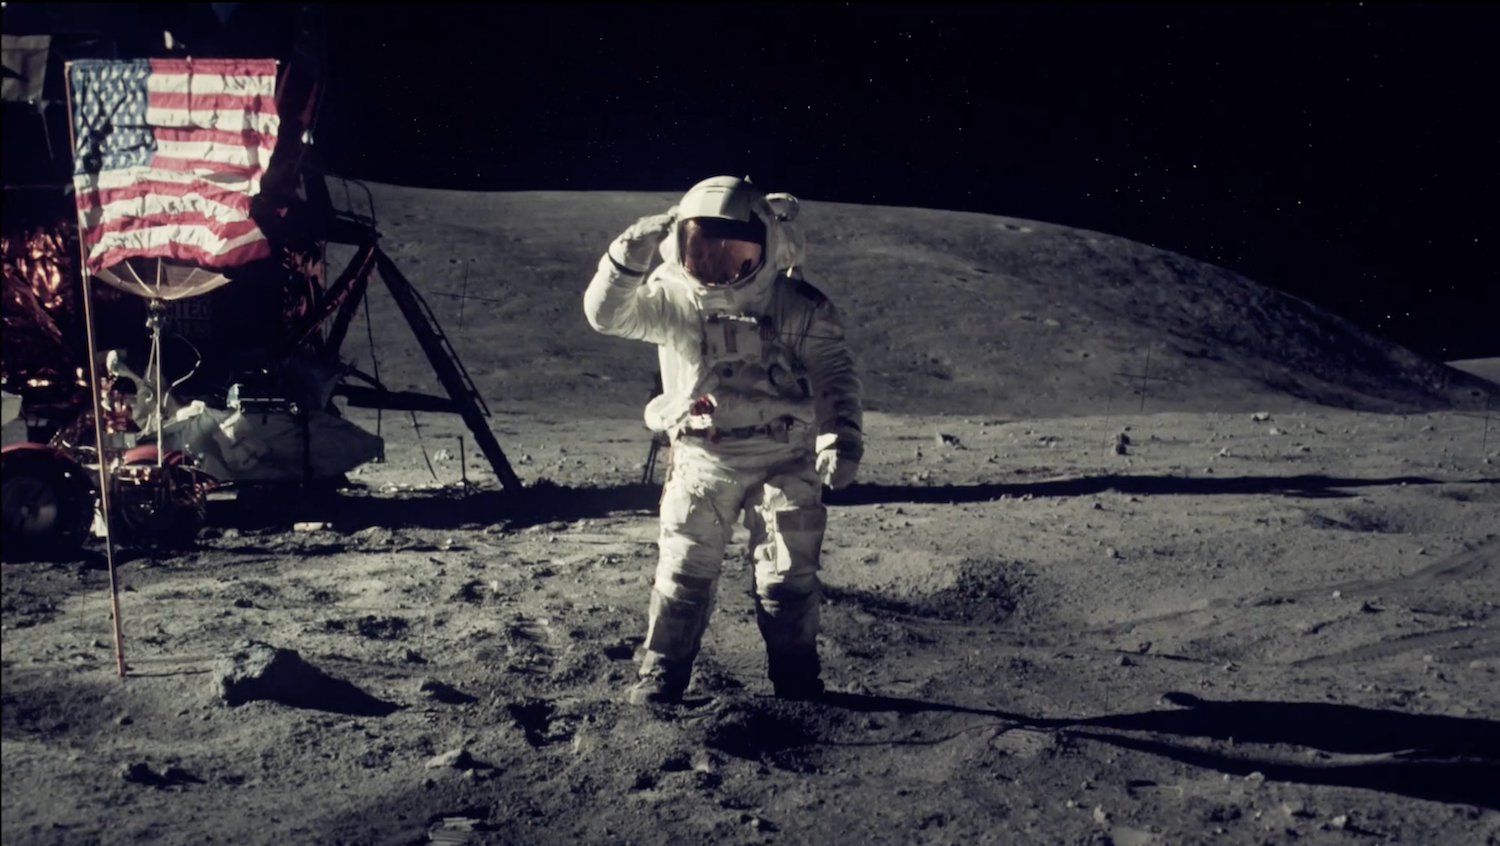 Armstrong on the moon. Аполлон 11 1969.